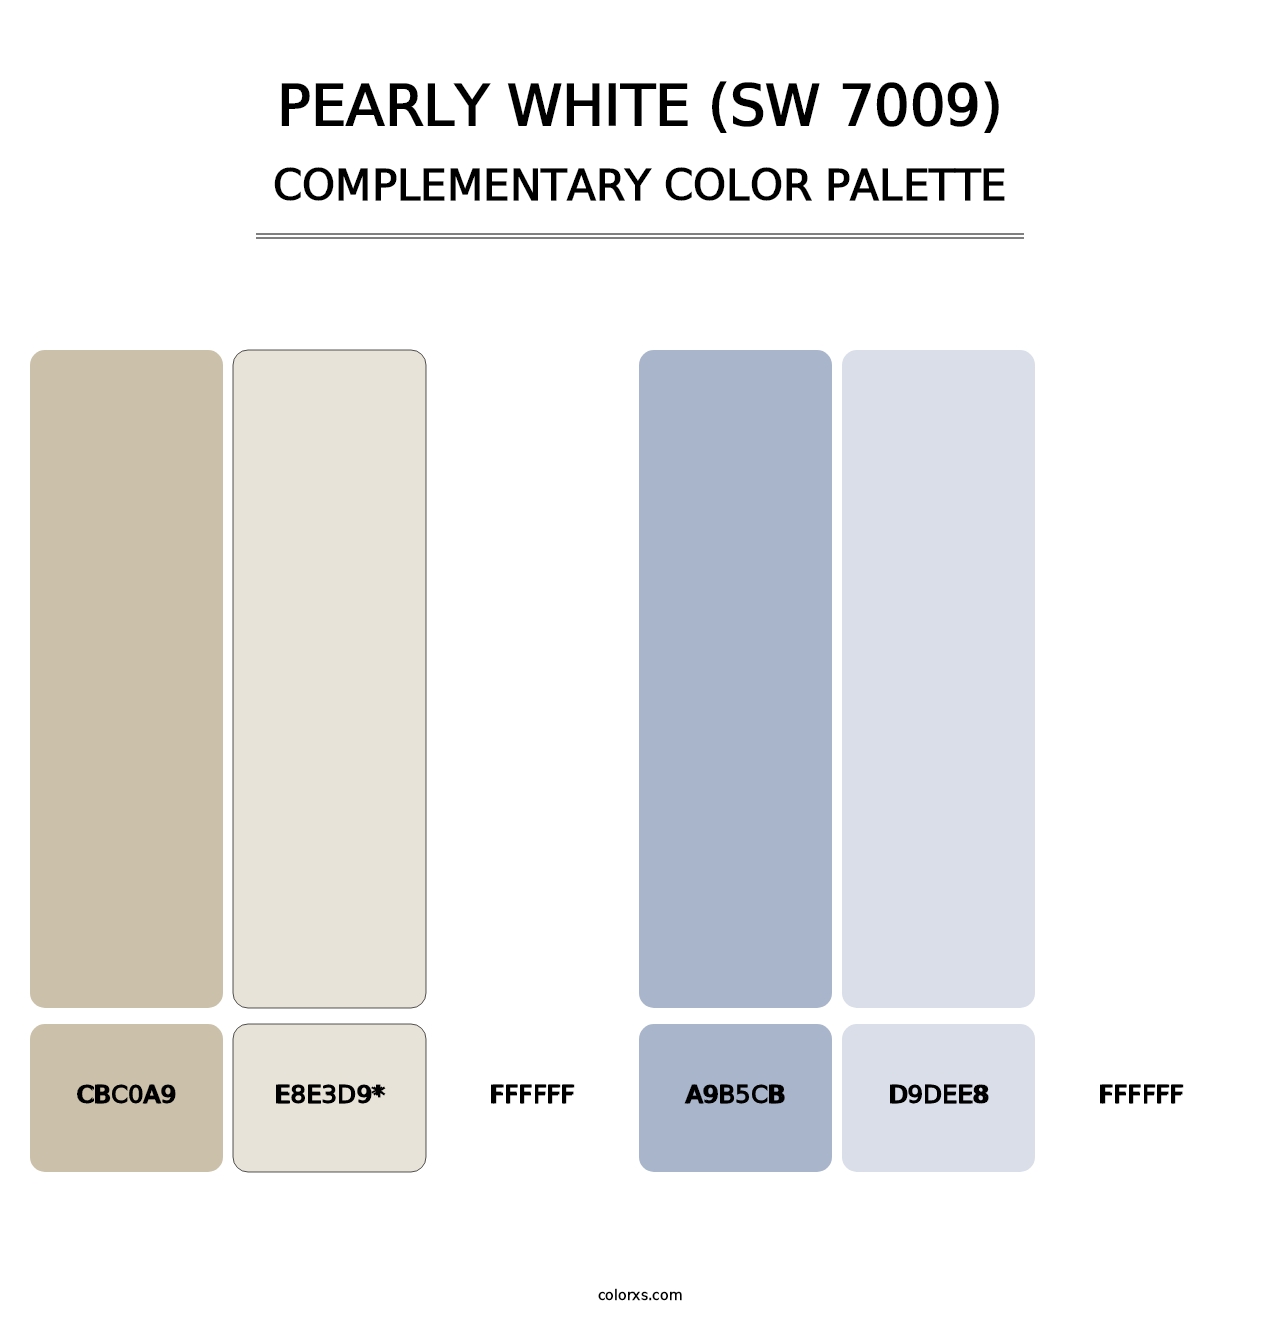 Pearly White (SW 7009) - Complementary Color Palette